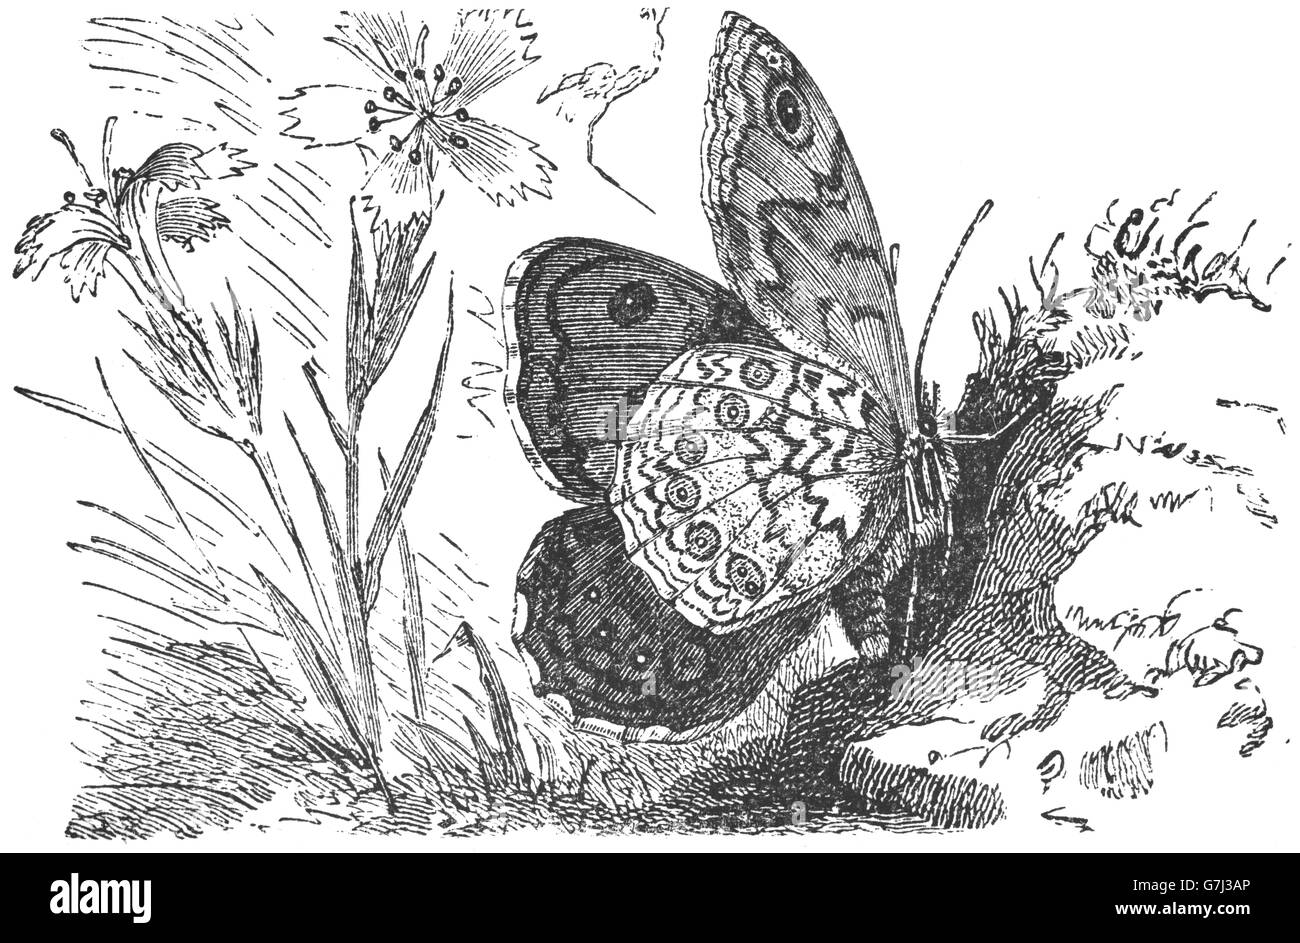 Lasiommata megera, wall brown, butterfly, Nymphalidae, illustration from book dated 1904 Stock Photo